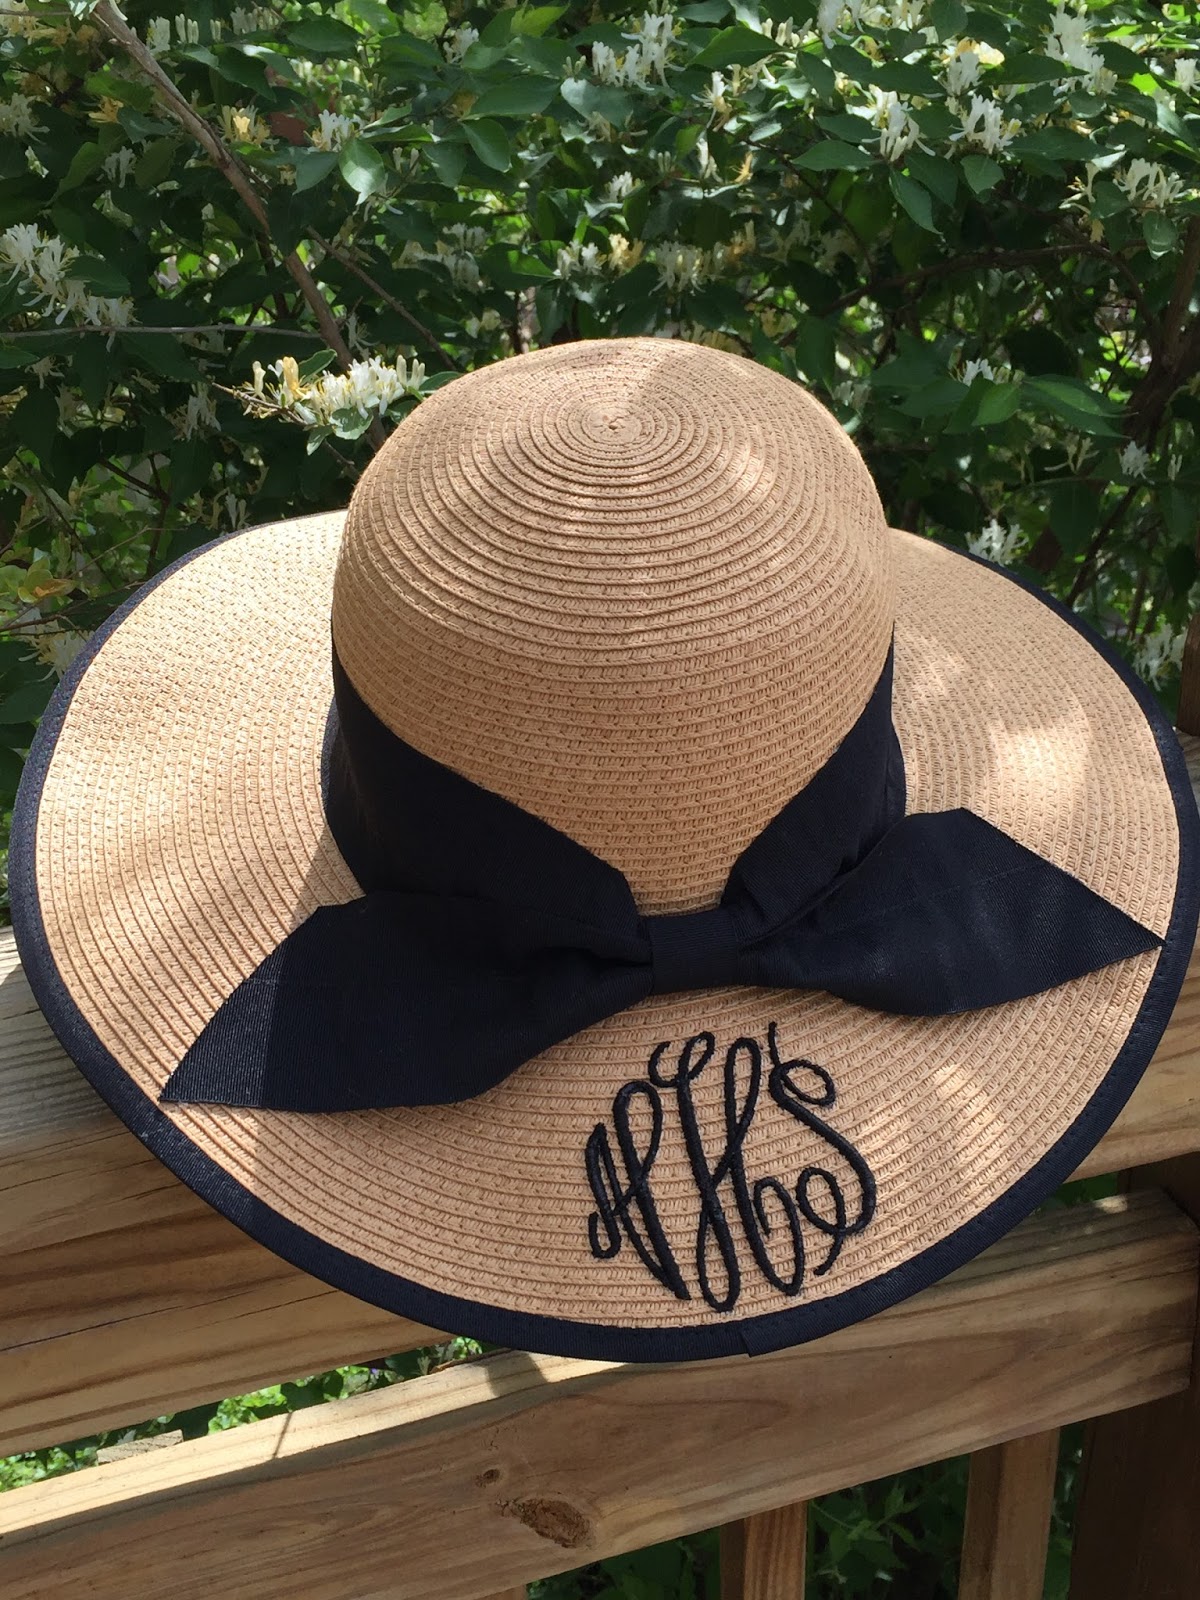 With Glittering Eyes: Monogrammed Straw Hat